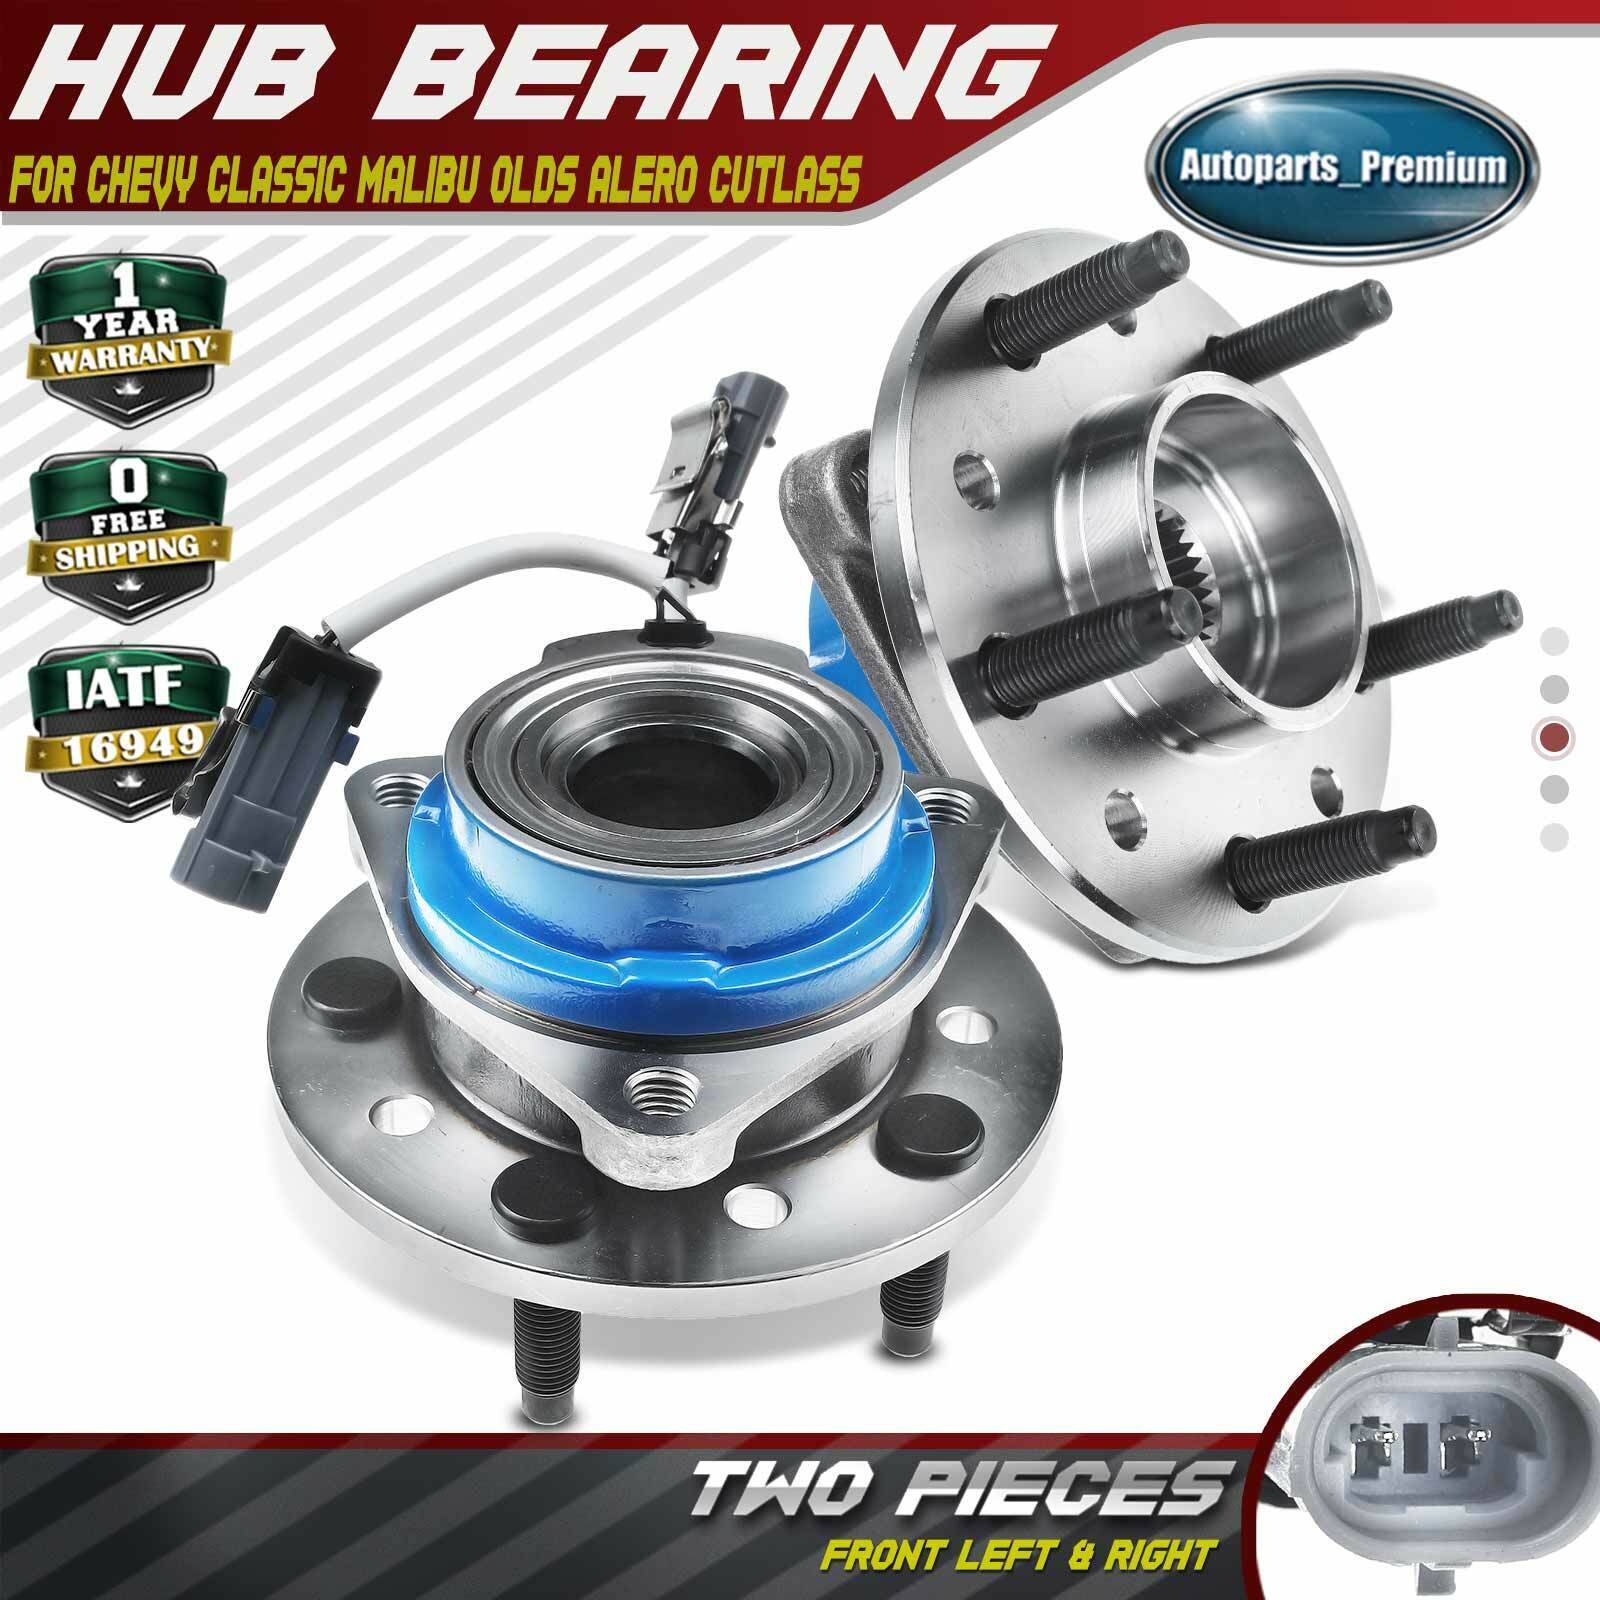 2x Front LH or RH Wheel Hub Bearing Assembly for Oldsmobile Alero 99-04 Cutlass